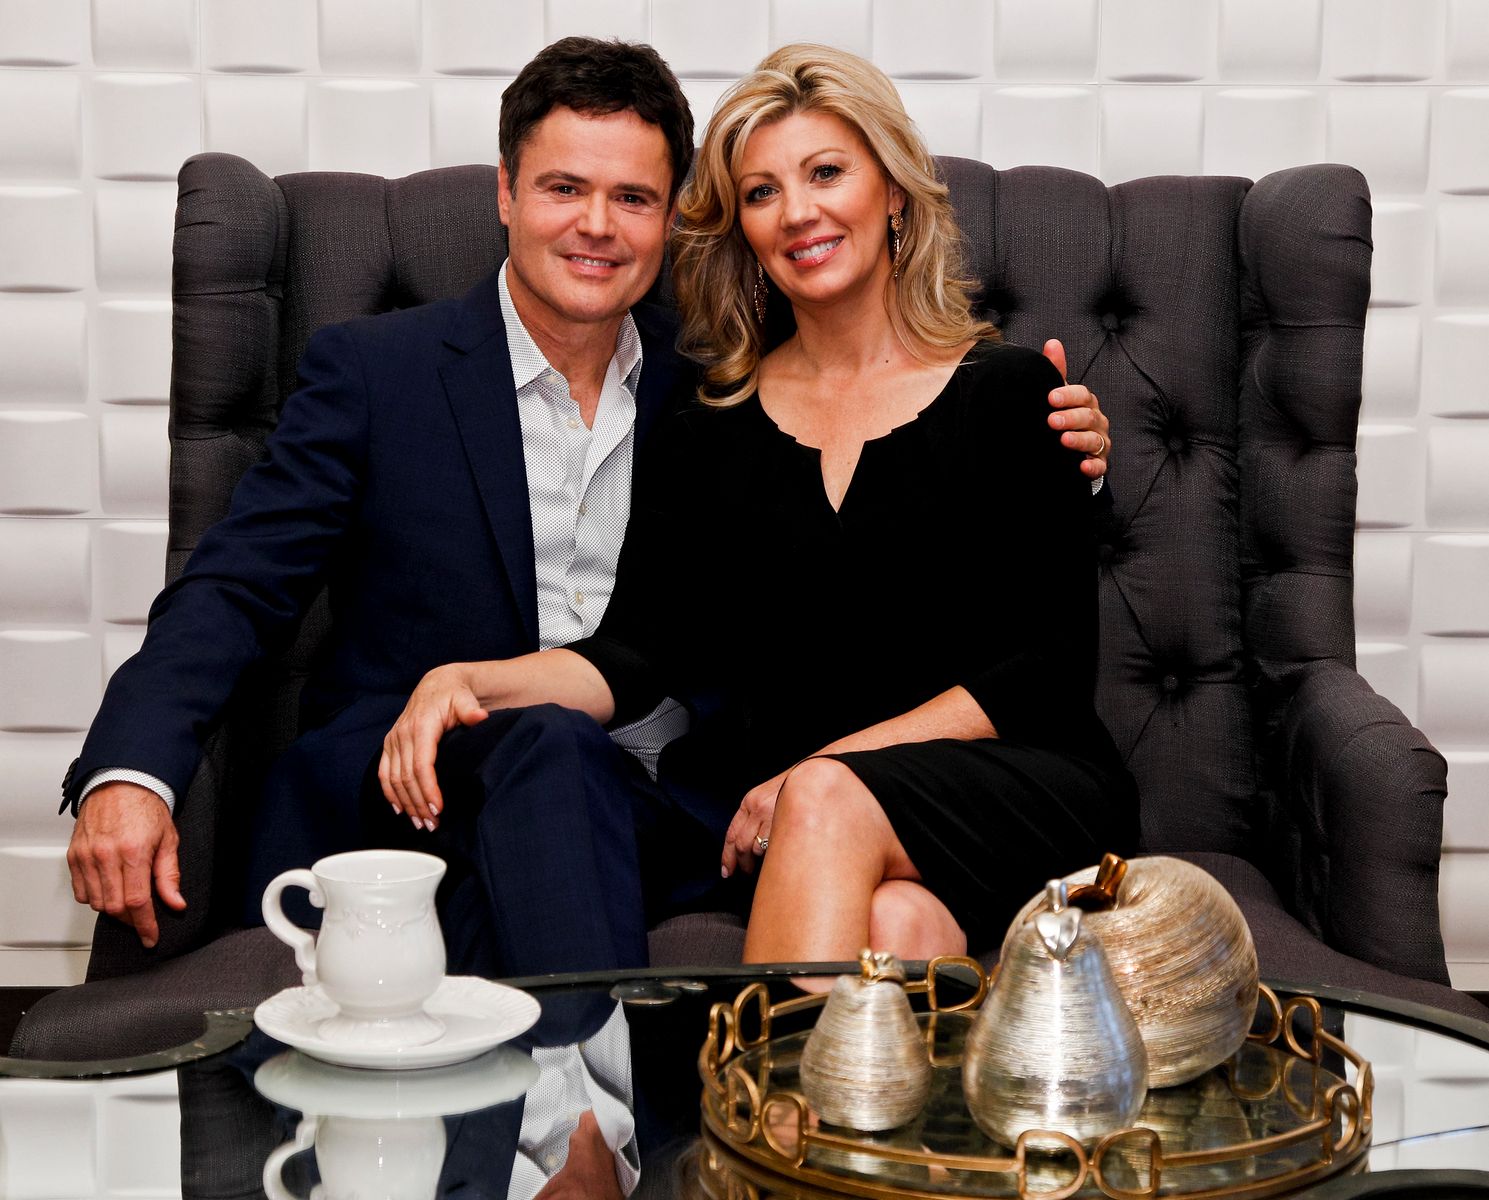 Donny and Debbie Osmond at the launch of the Donny Osmond Home on September 23, 2013, in New York City | Photo: Brian Ach/WireImage/Getty Images